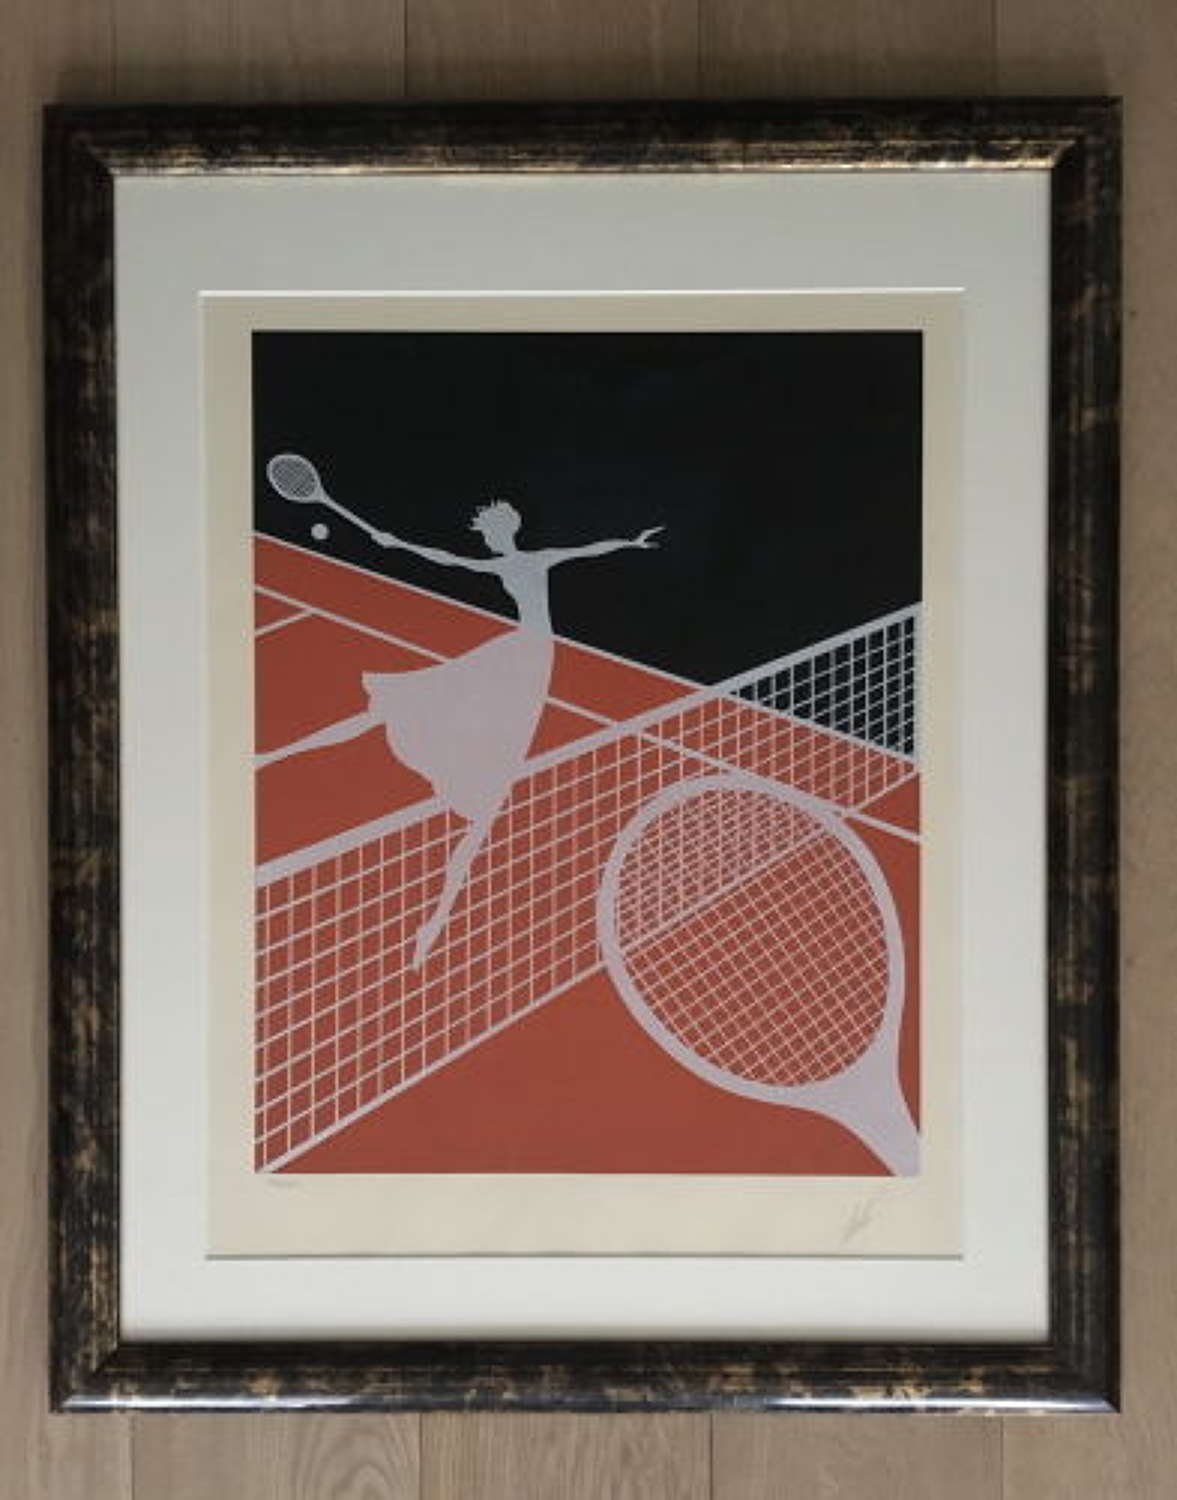 Erte - Limited Edition Signed Screen Print After the Love %26 Tennis S